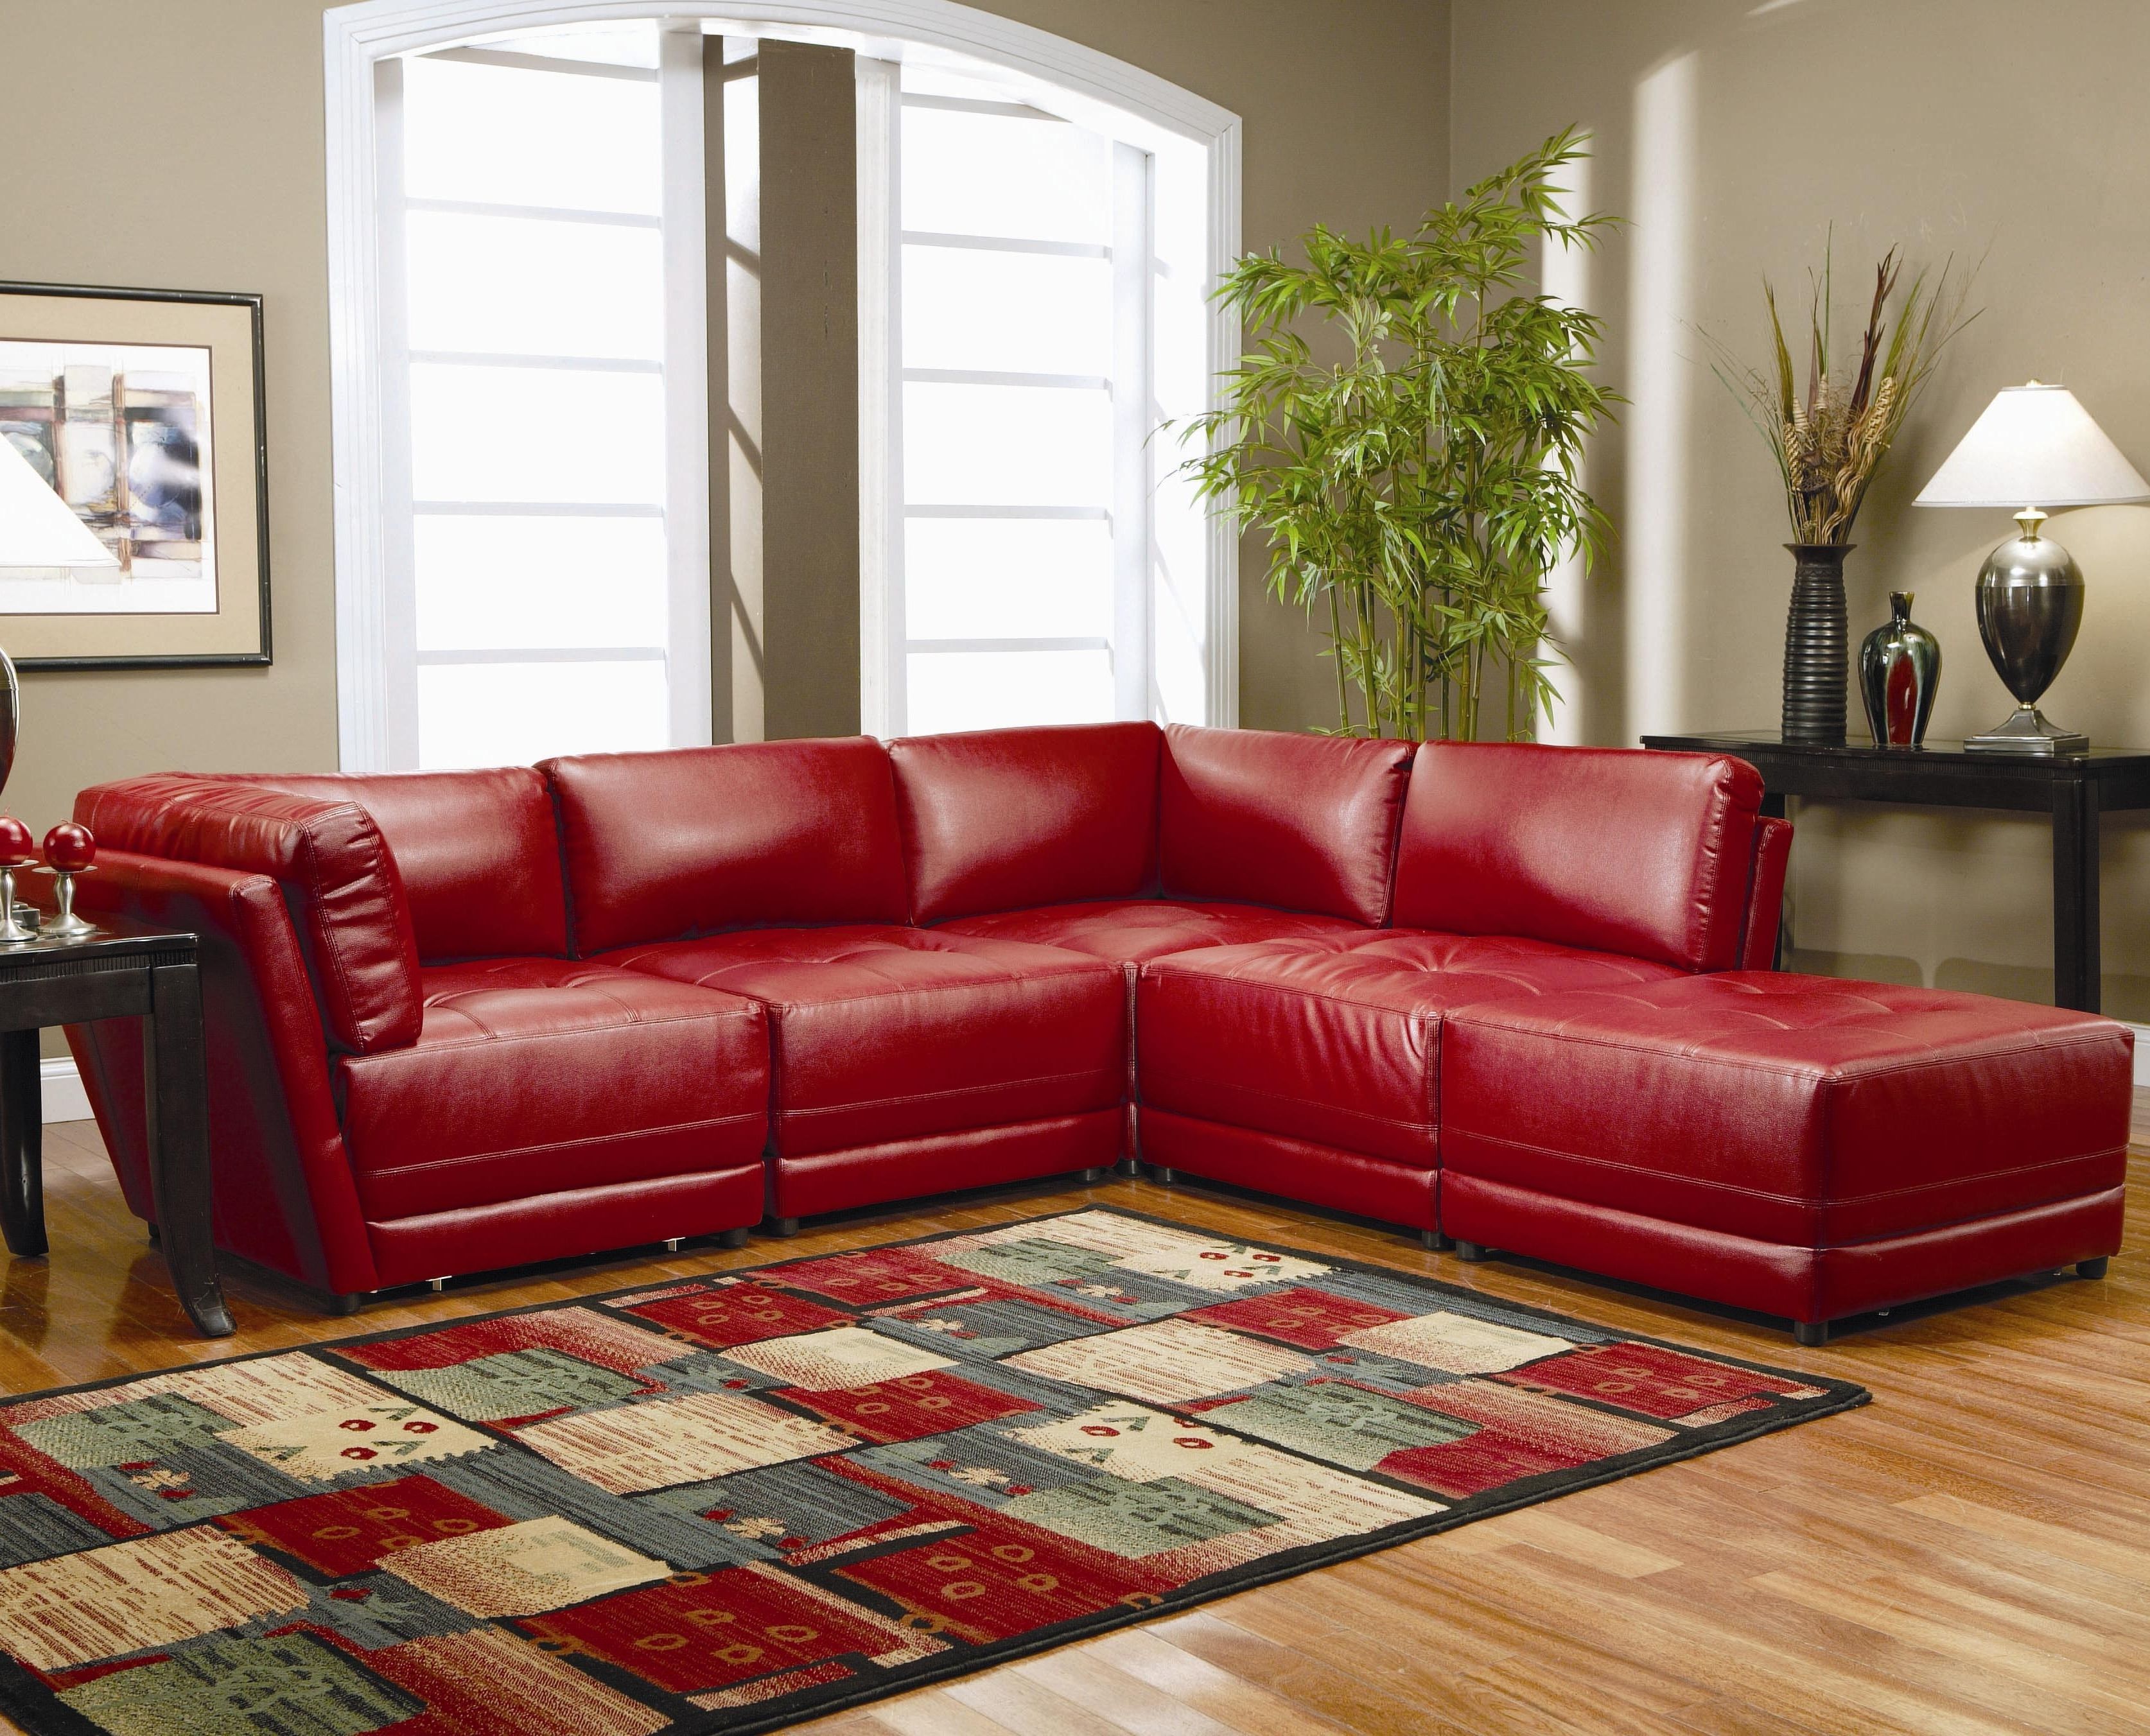 Warm Red Leather Sectional L Shaped Sofa Design Ideas For Living Pertaining To Favorite Red Leather Sectional Couches (View 18 of 20)